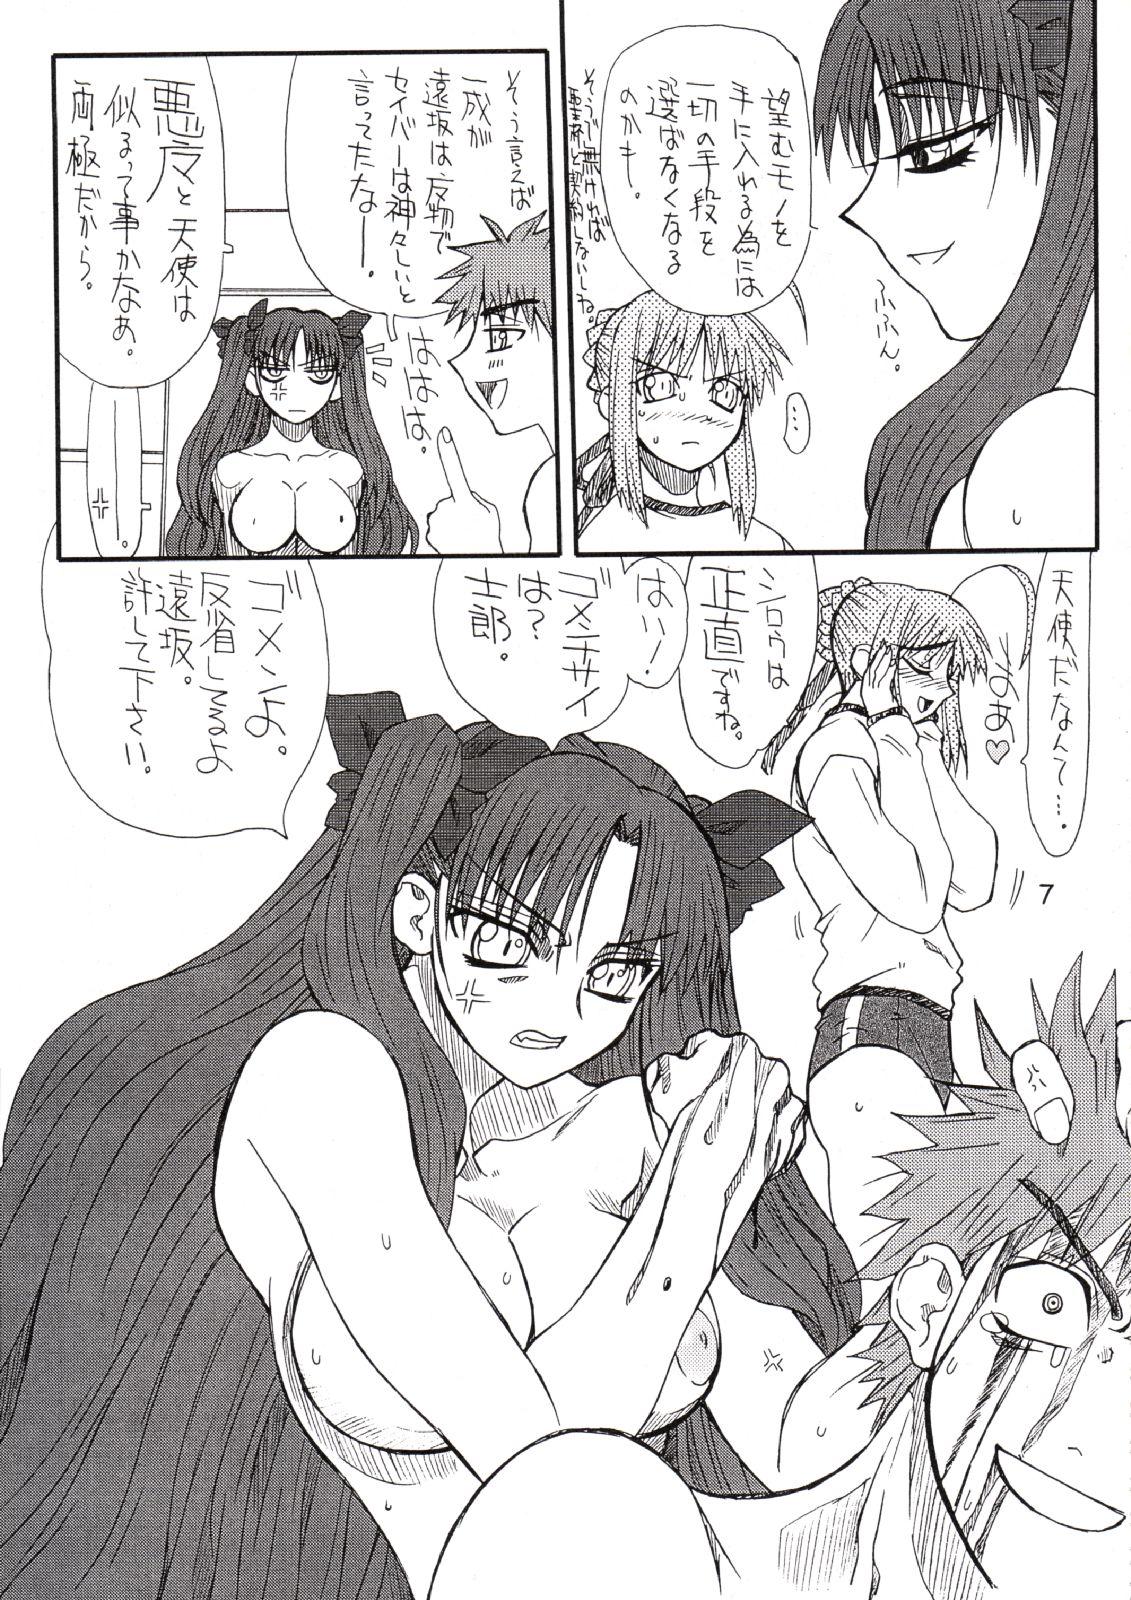 Transex Corn 2 - Fate stay night Strap On - Page 6